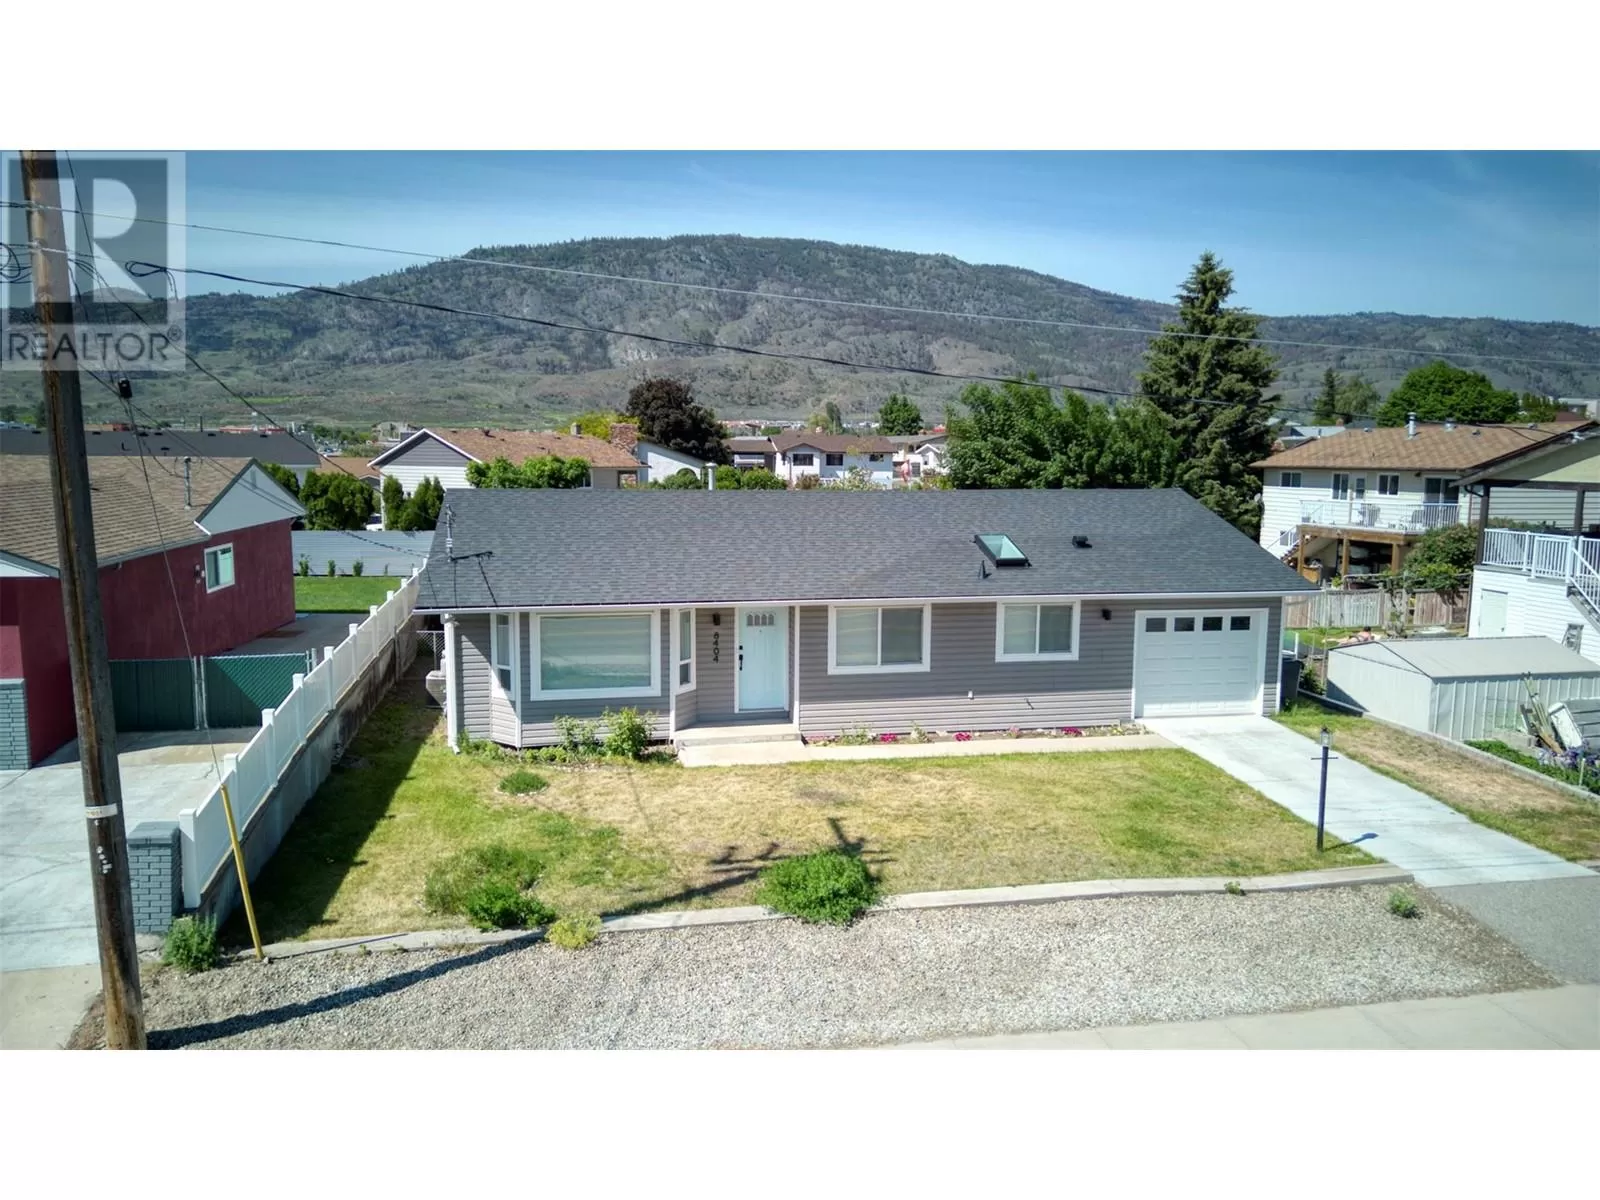 House for rent: 8404 87th Street, Osoyoos, British Columbia V0H 1V2